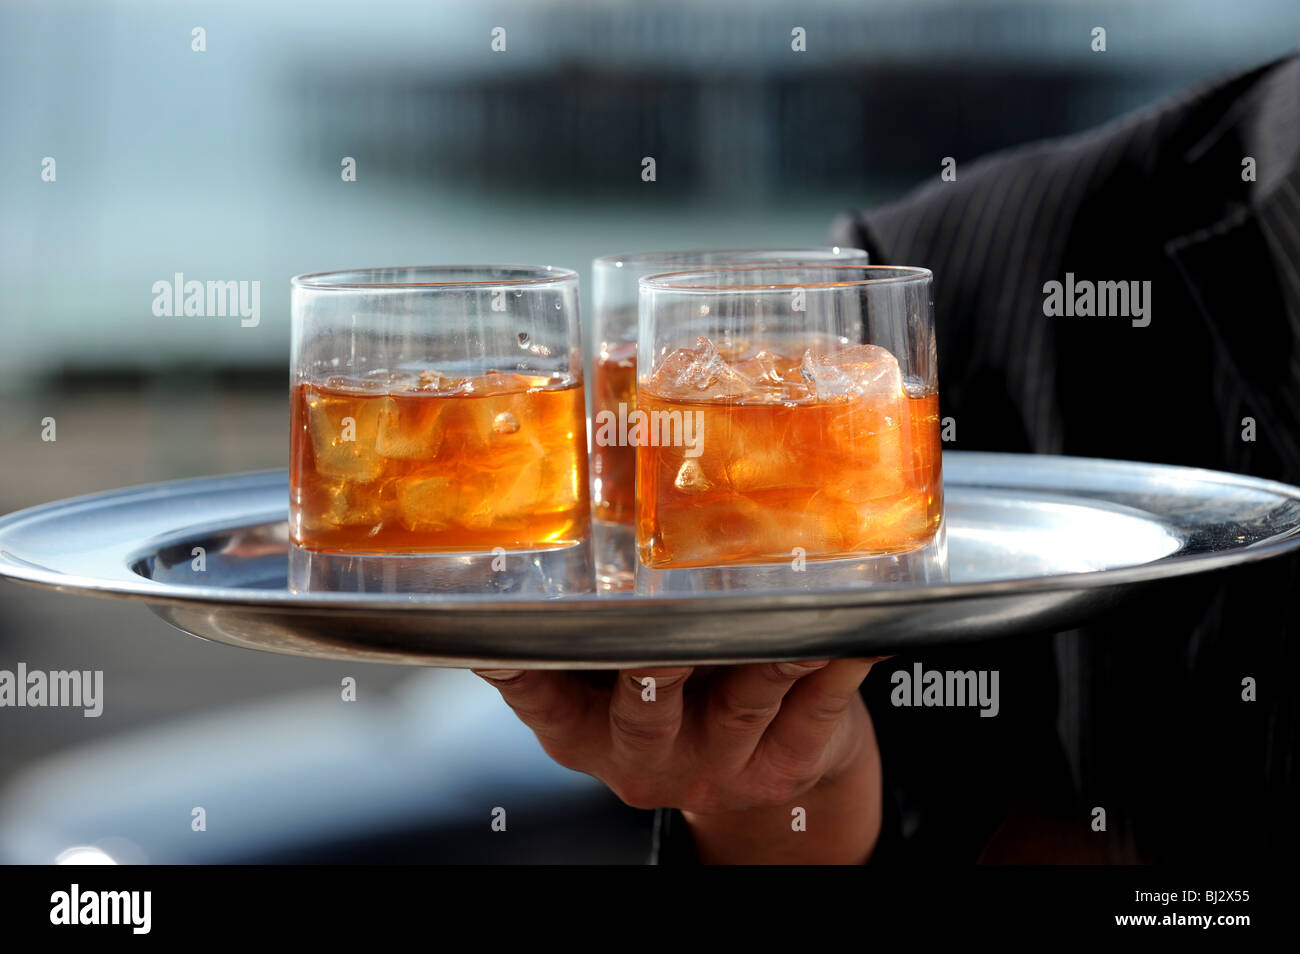 Tumbler glasses of whisky with lumps of ice cubes on a tray held by hand in front of West Pier Brighton seafront Stock Photo